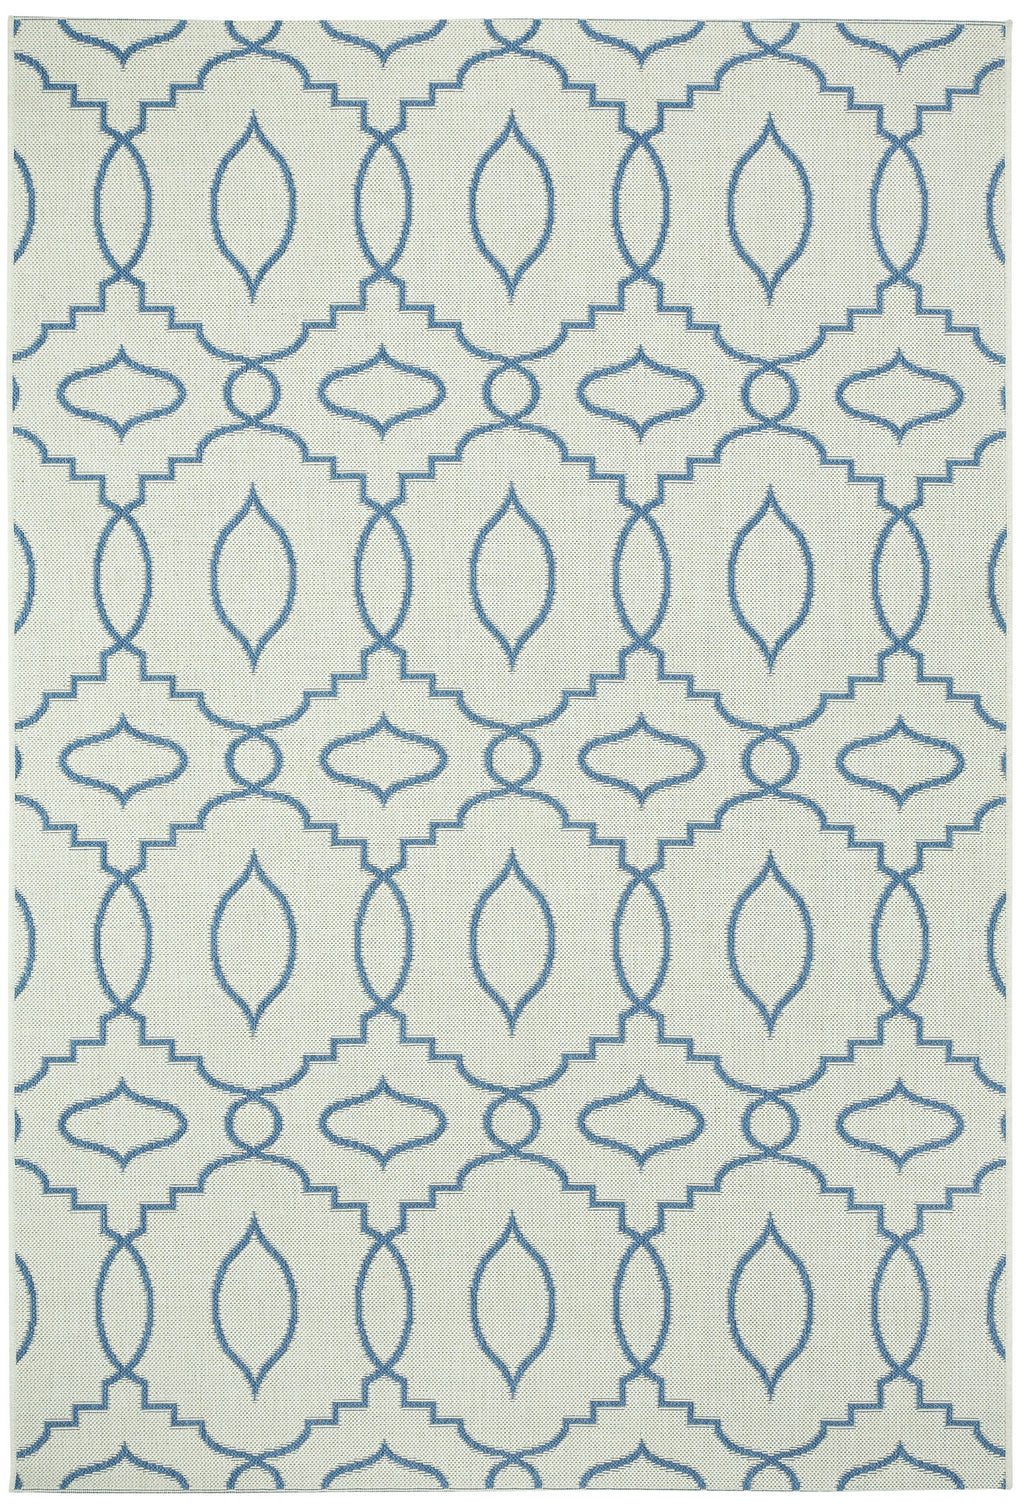 Capel Elsinore Moor 4733 Blueberry 440 Area Rug by Genevieve Gorder main image